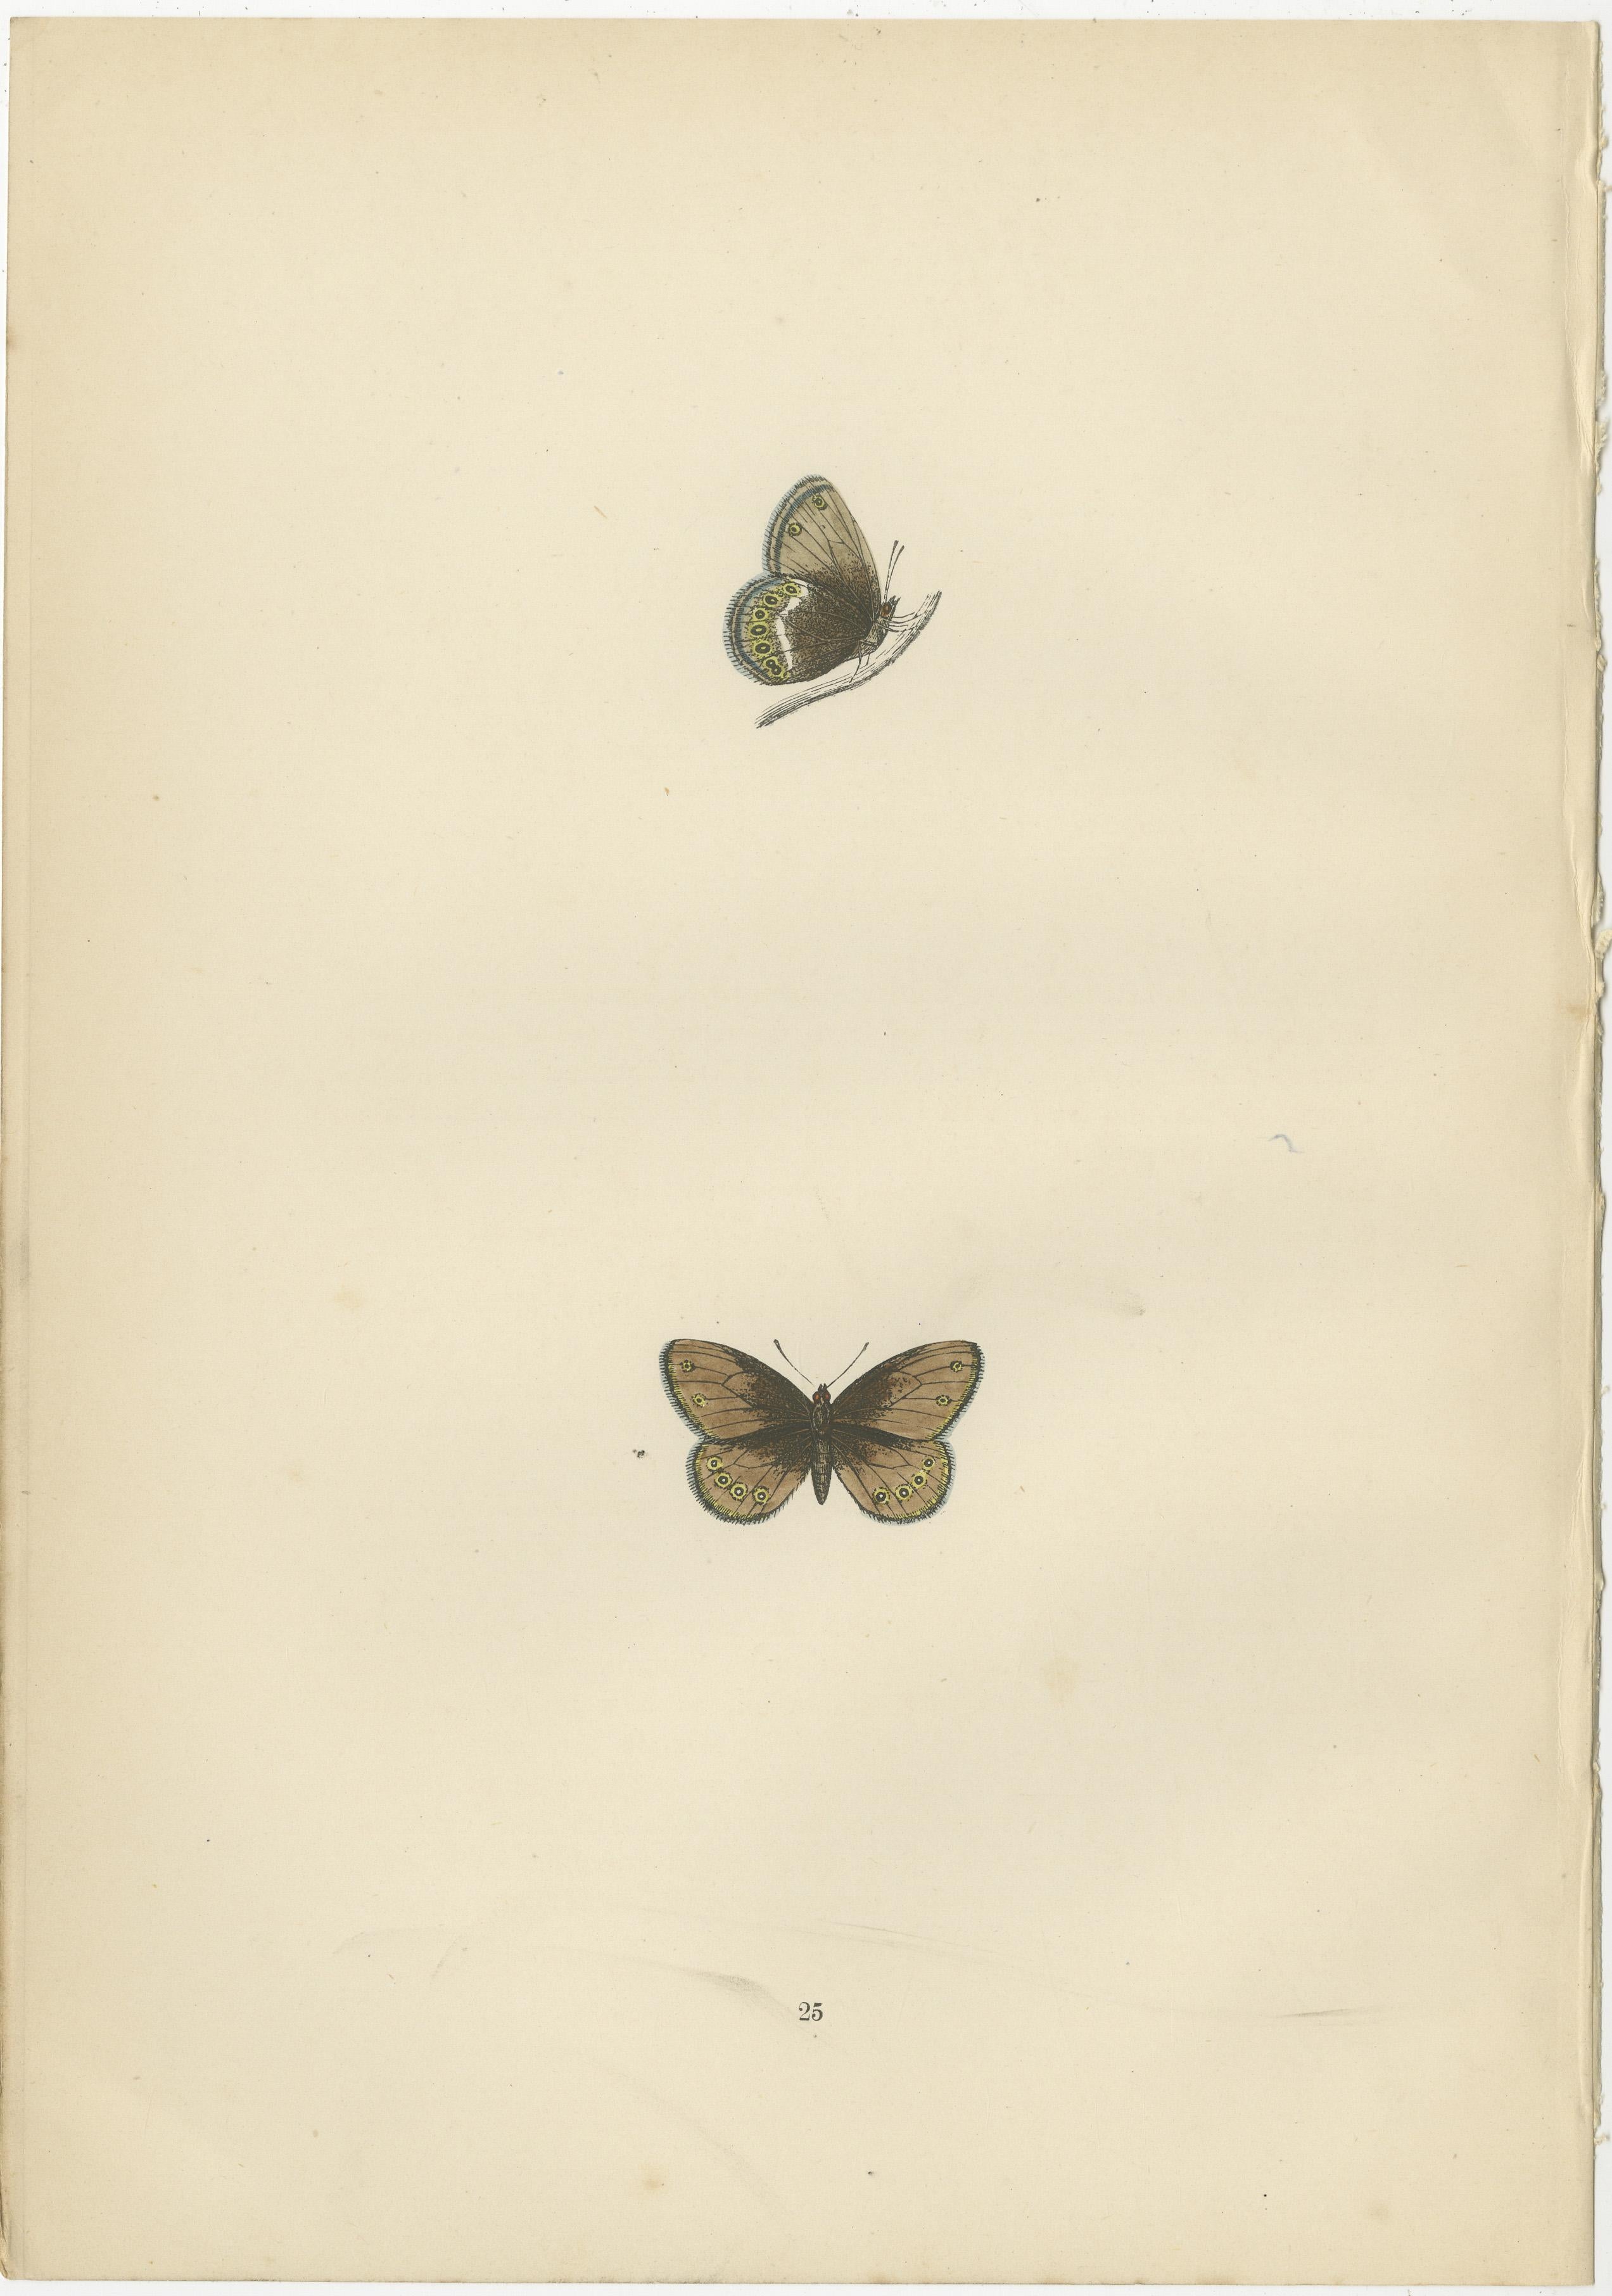 These plates illustrate three notable butterfly species:

1. **Silver-Bordered Ringlet (Boloria selene, previously known as Clossiana selene):**
   The Silver-Bordered Ringlet is depicted in the top image on the first plate. This butterfly is